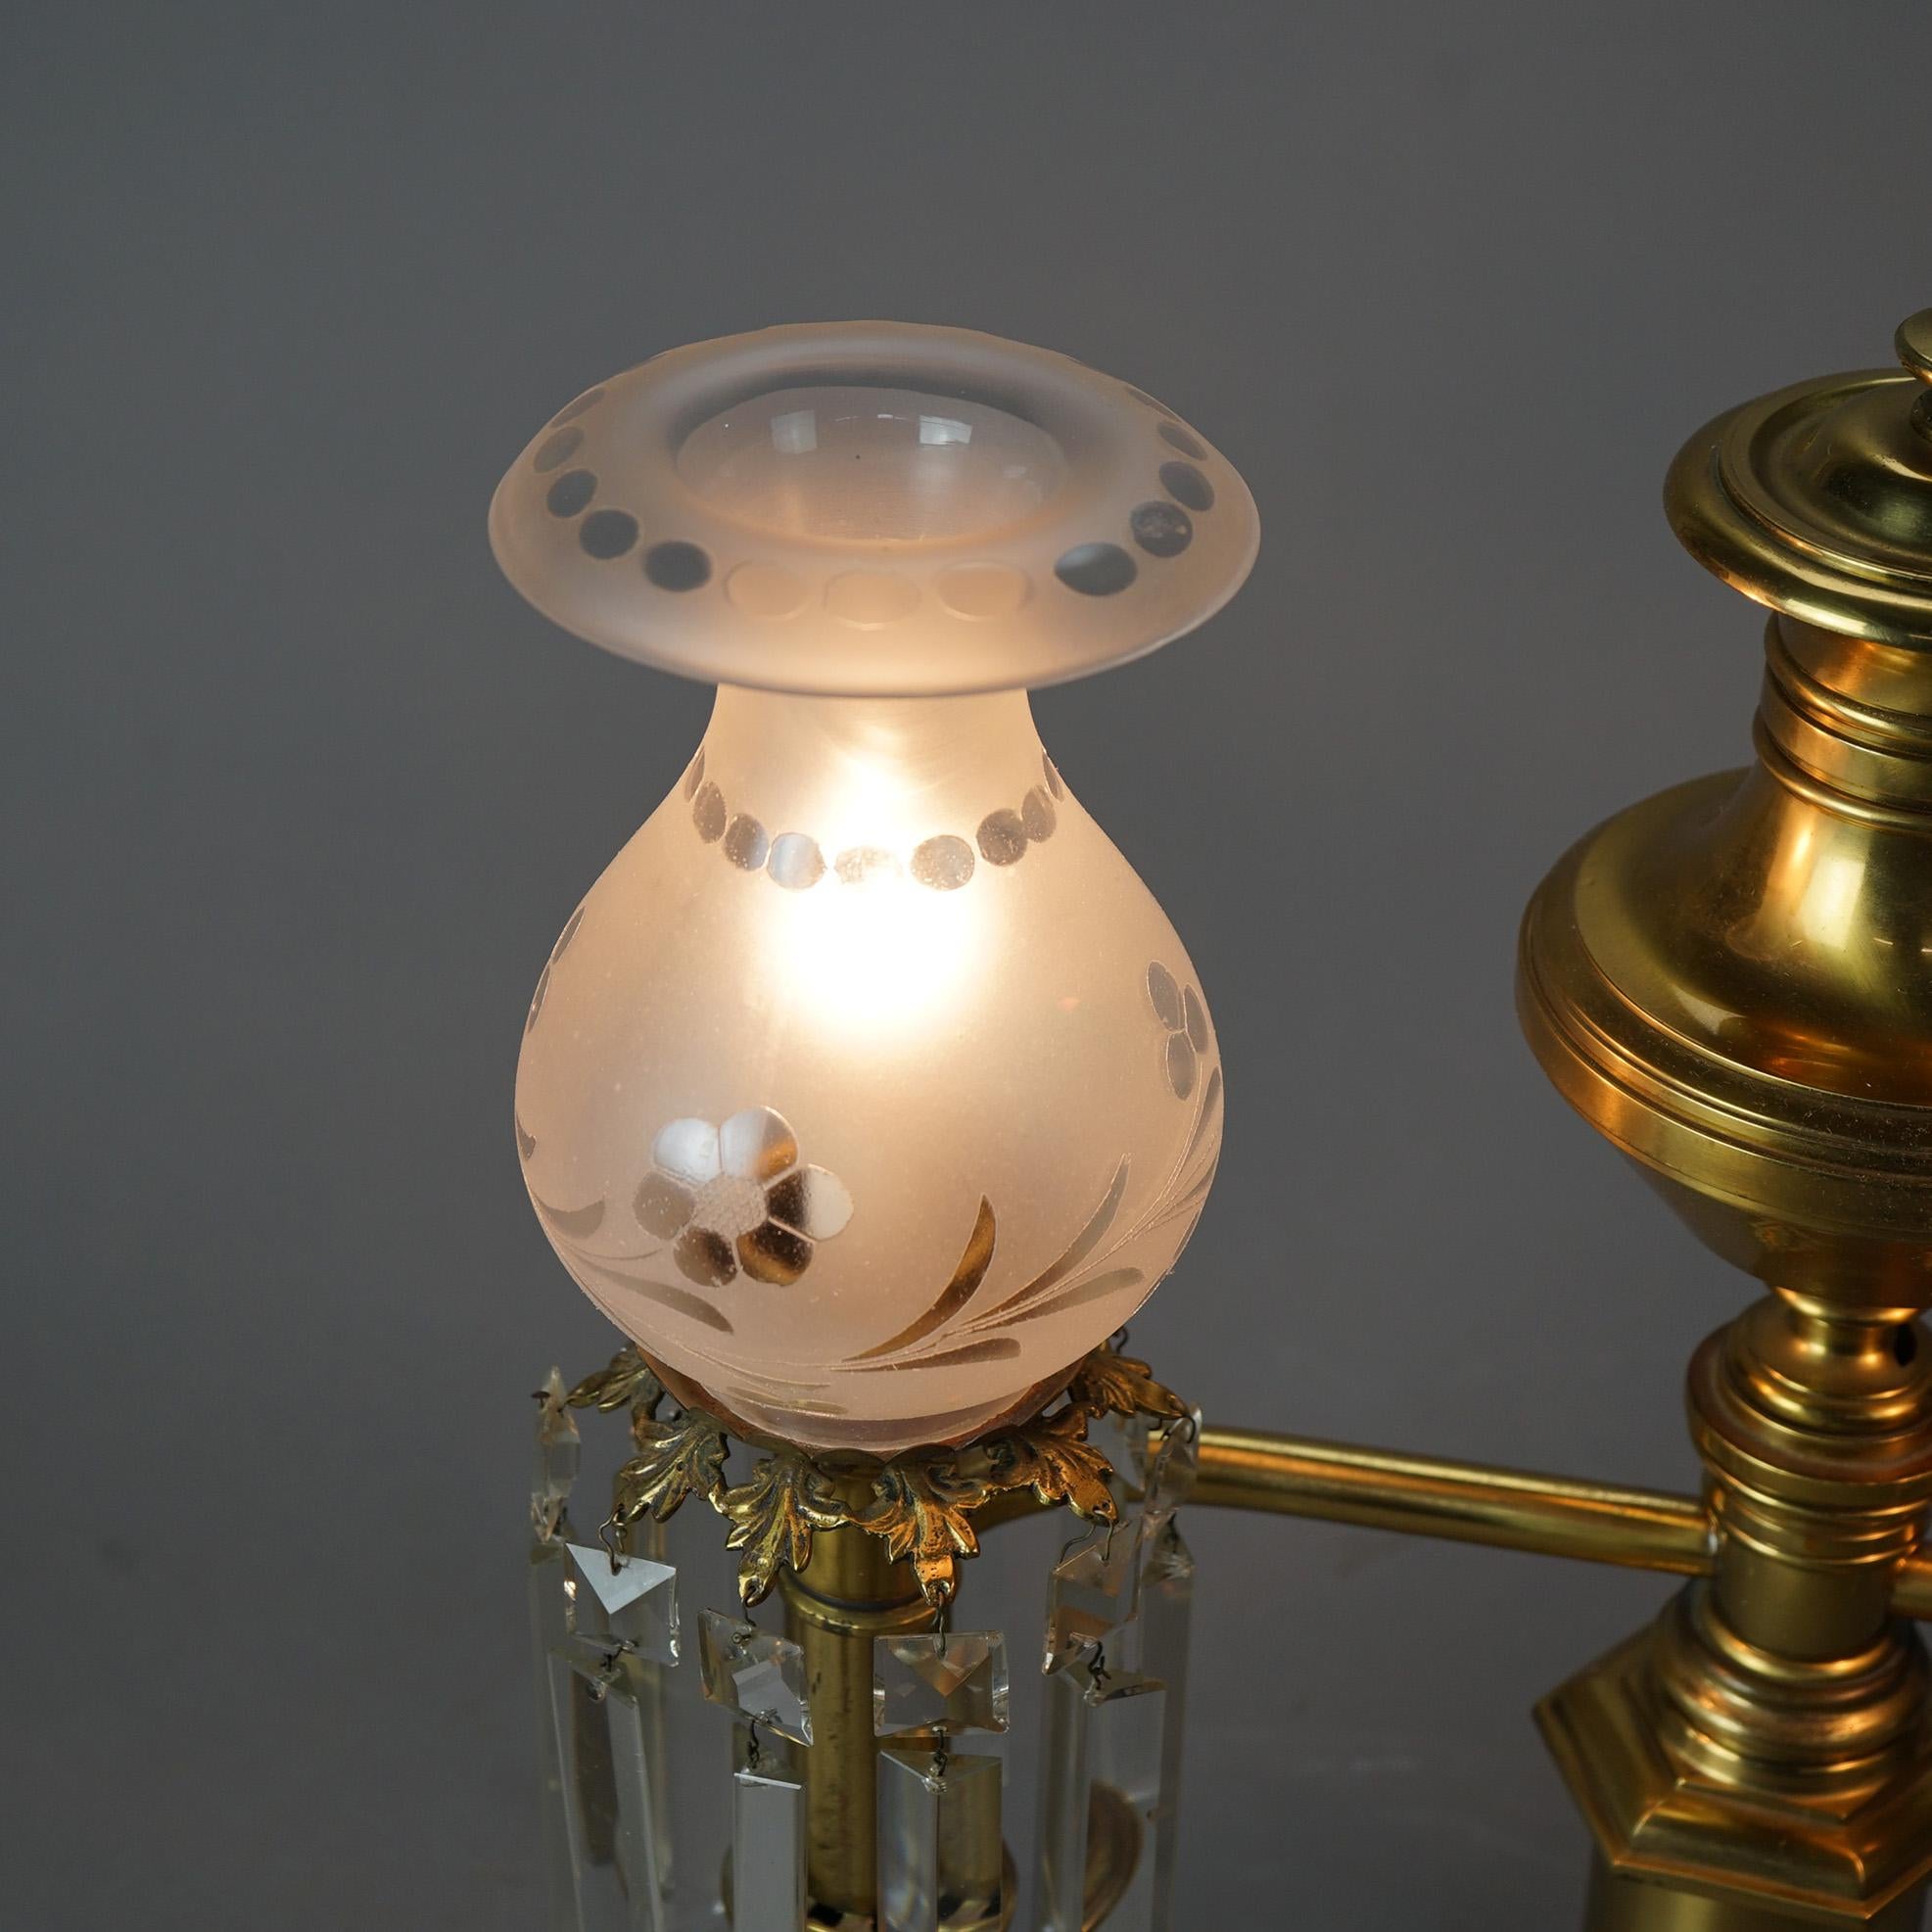 19th Century Antique Gilt Brass & Bronze Double Argand Lamp with Crystal Prisms, 19thC